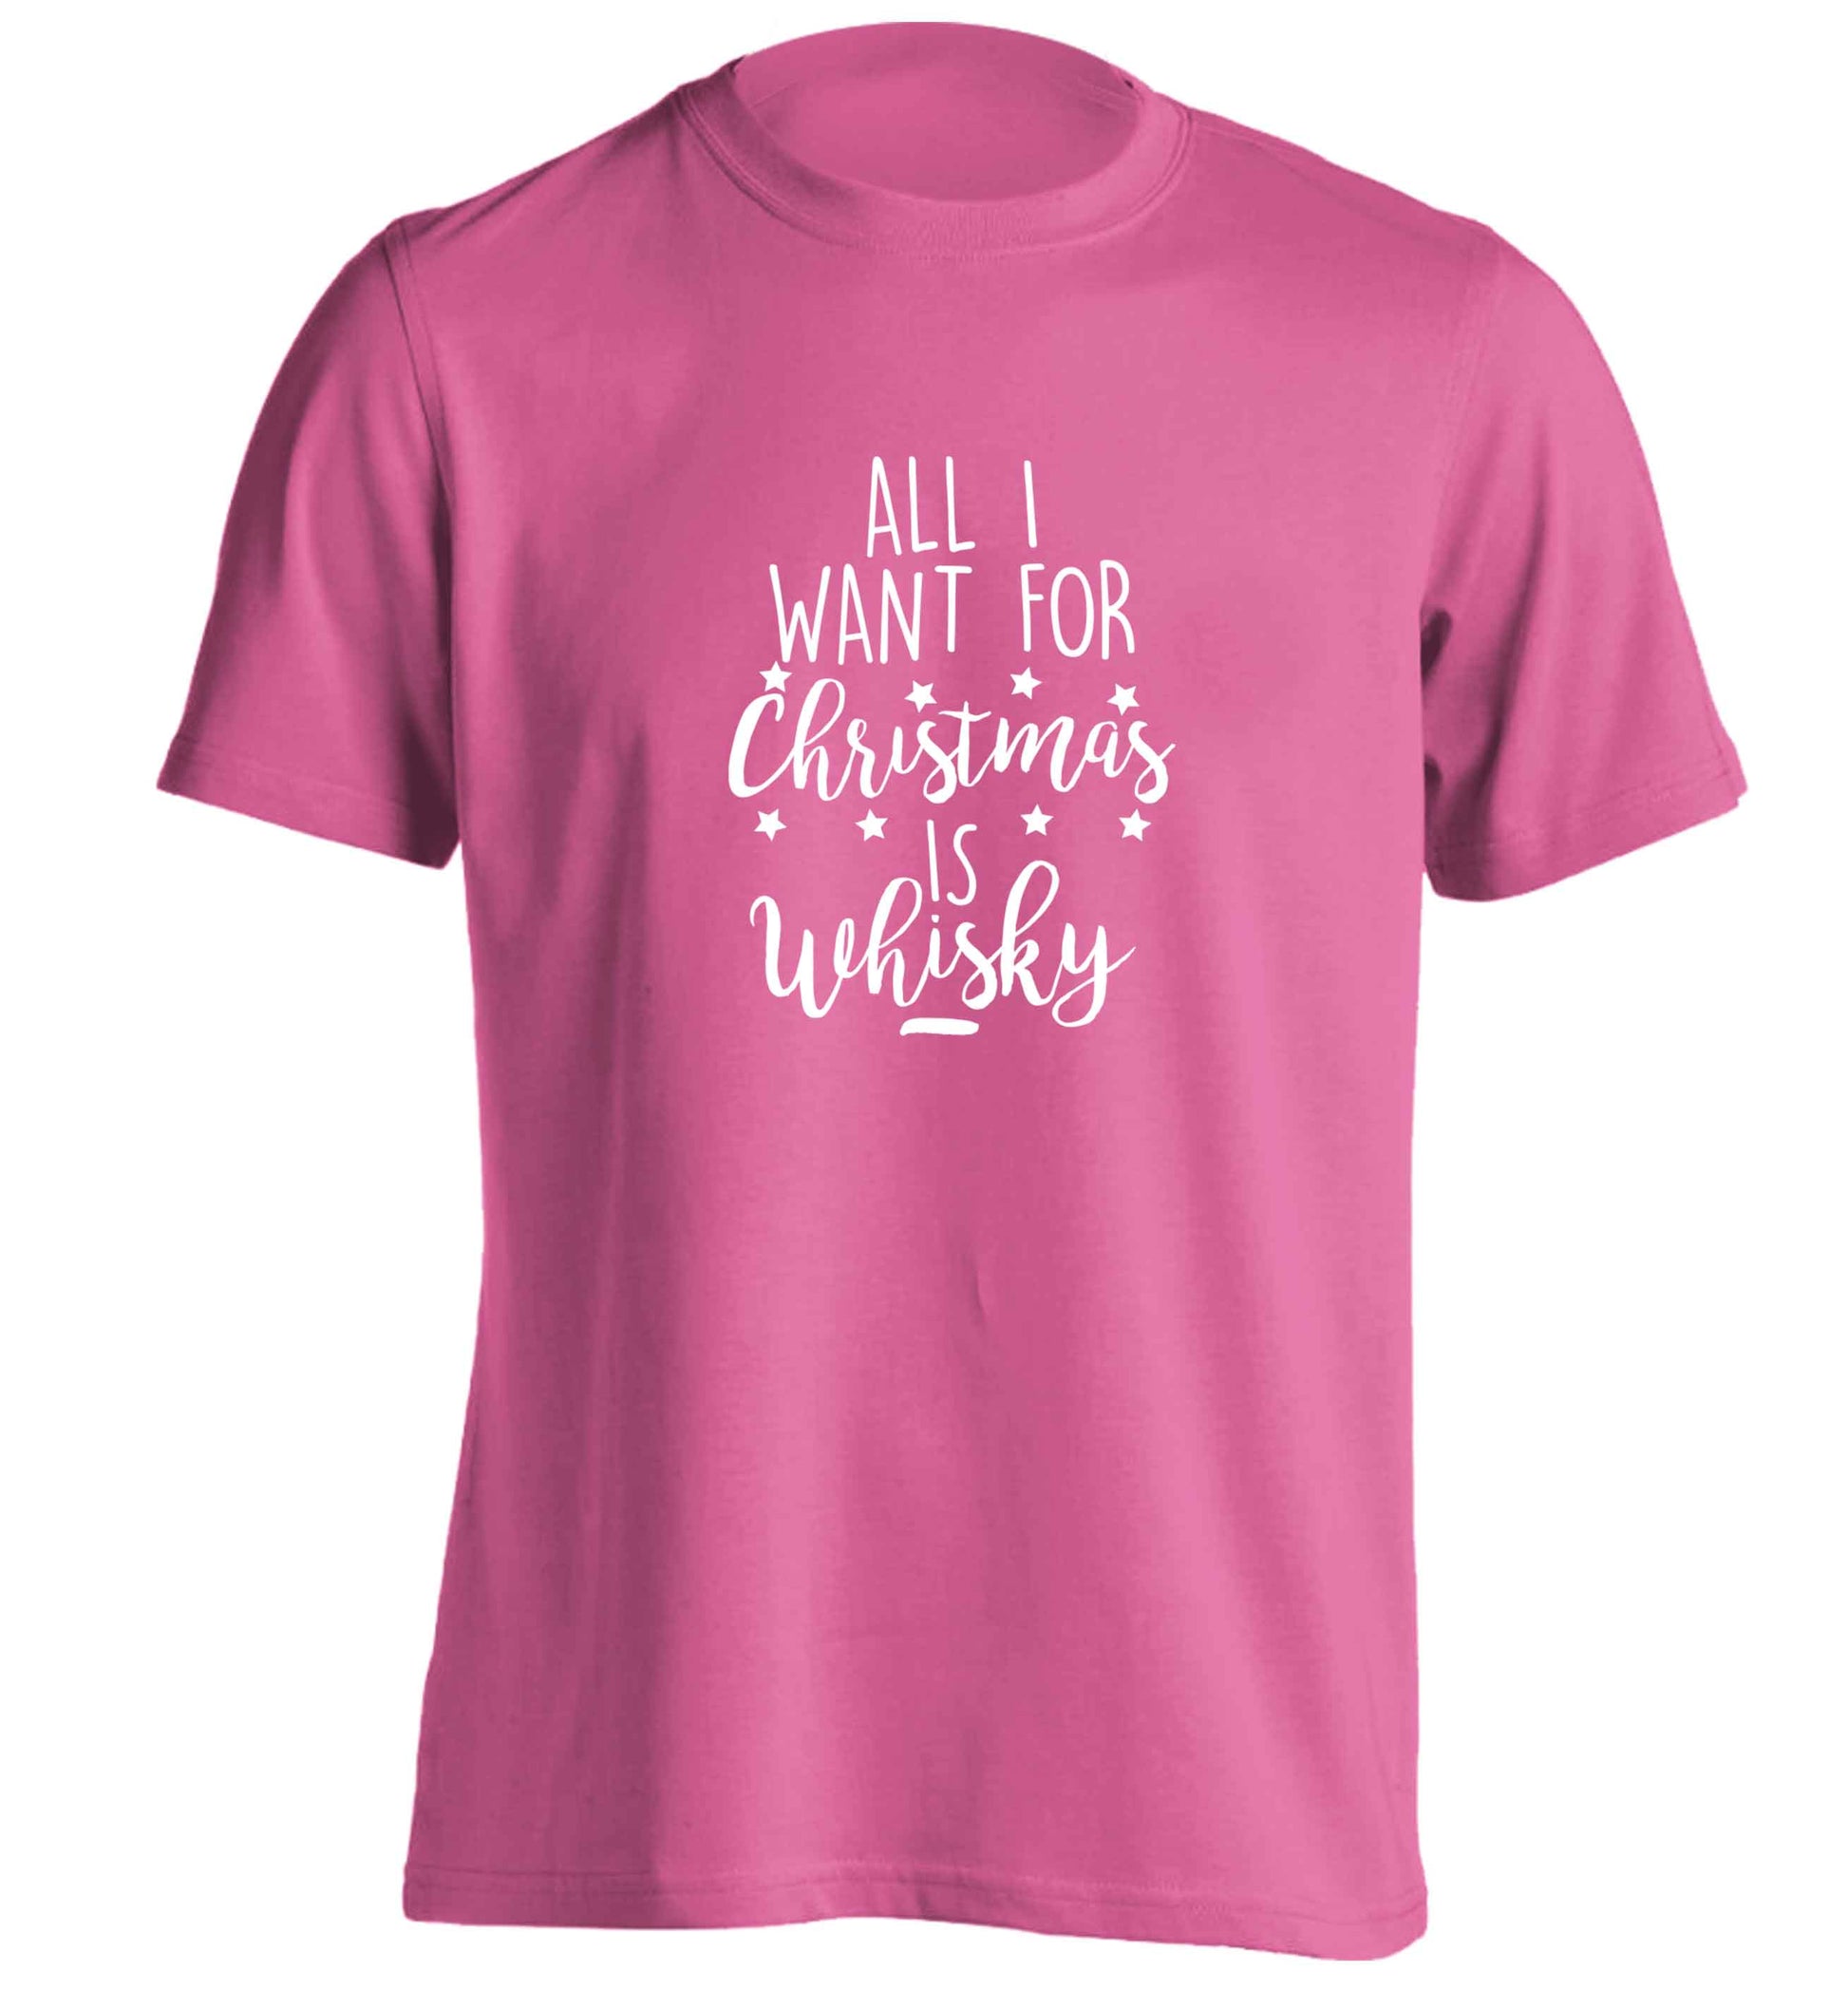 All I want for Christmas is whisky adults unisex pink Tshirt 2XL